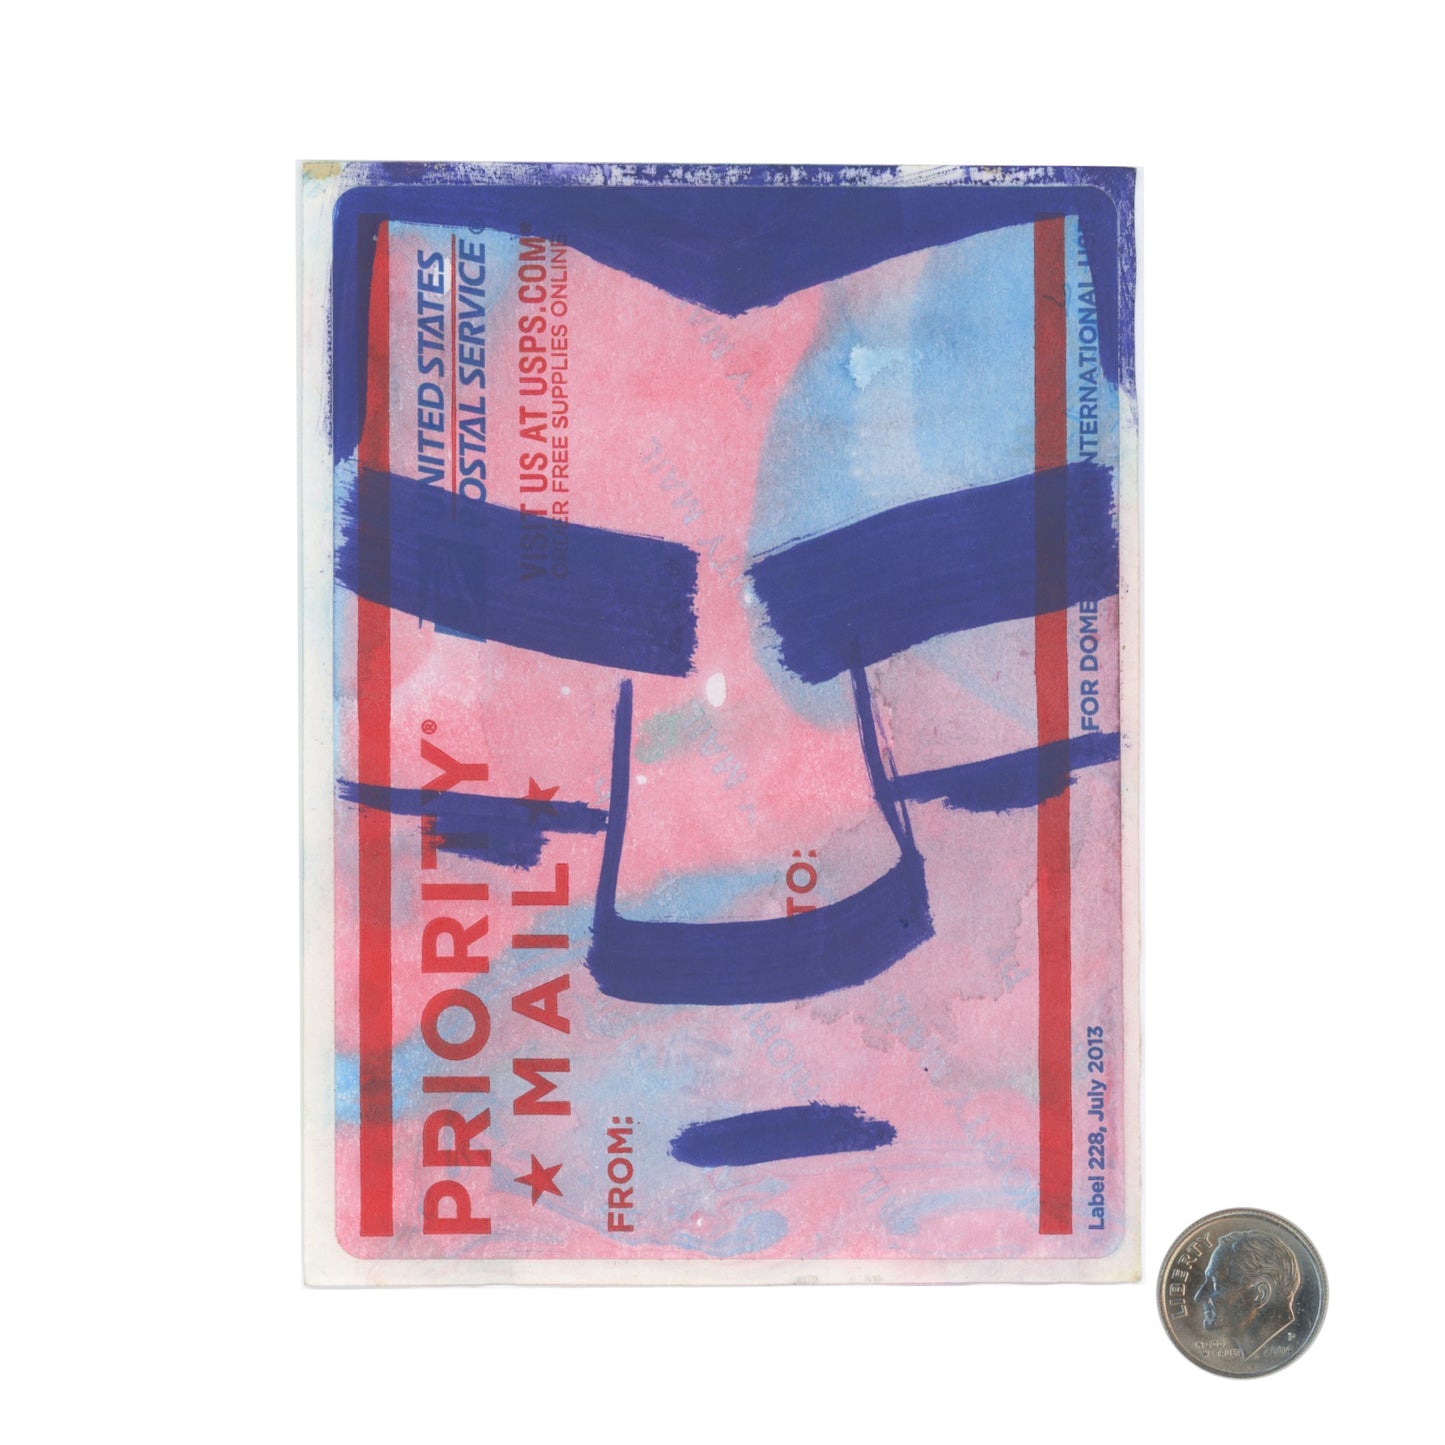 Ellis Disappointed Face USPS PRIORITY MAIL Blue Sticker with dime